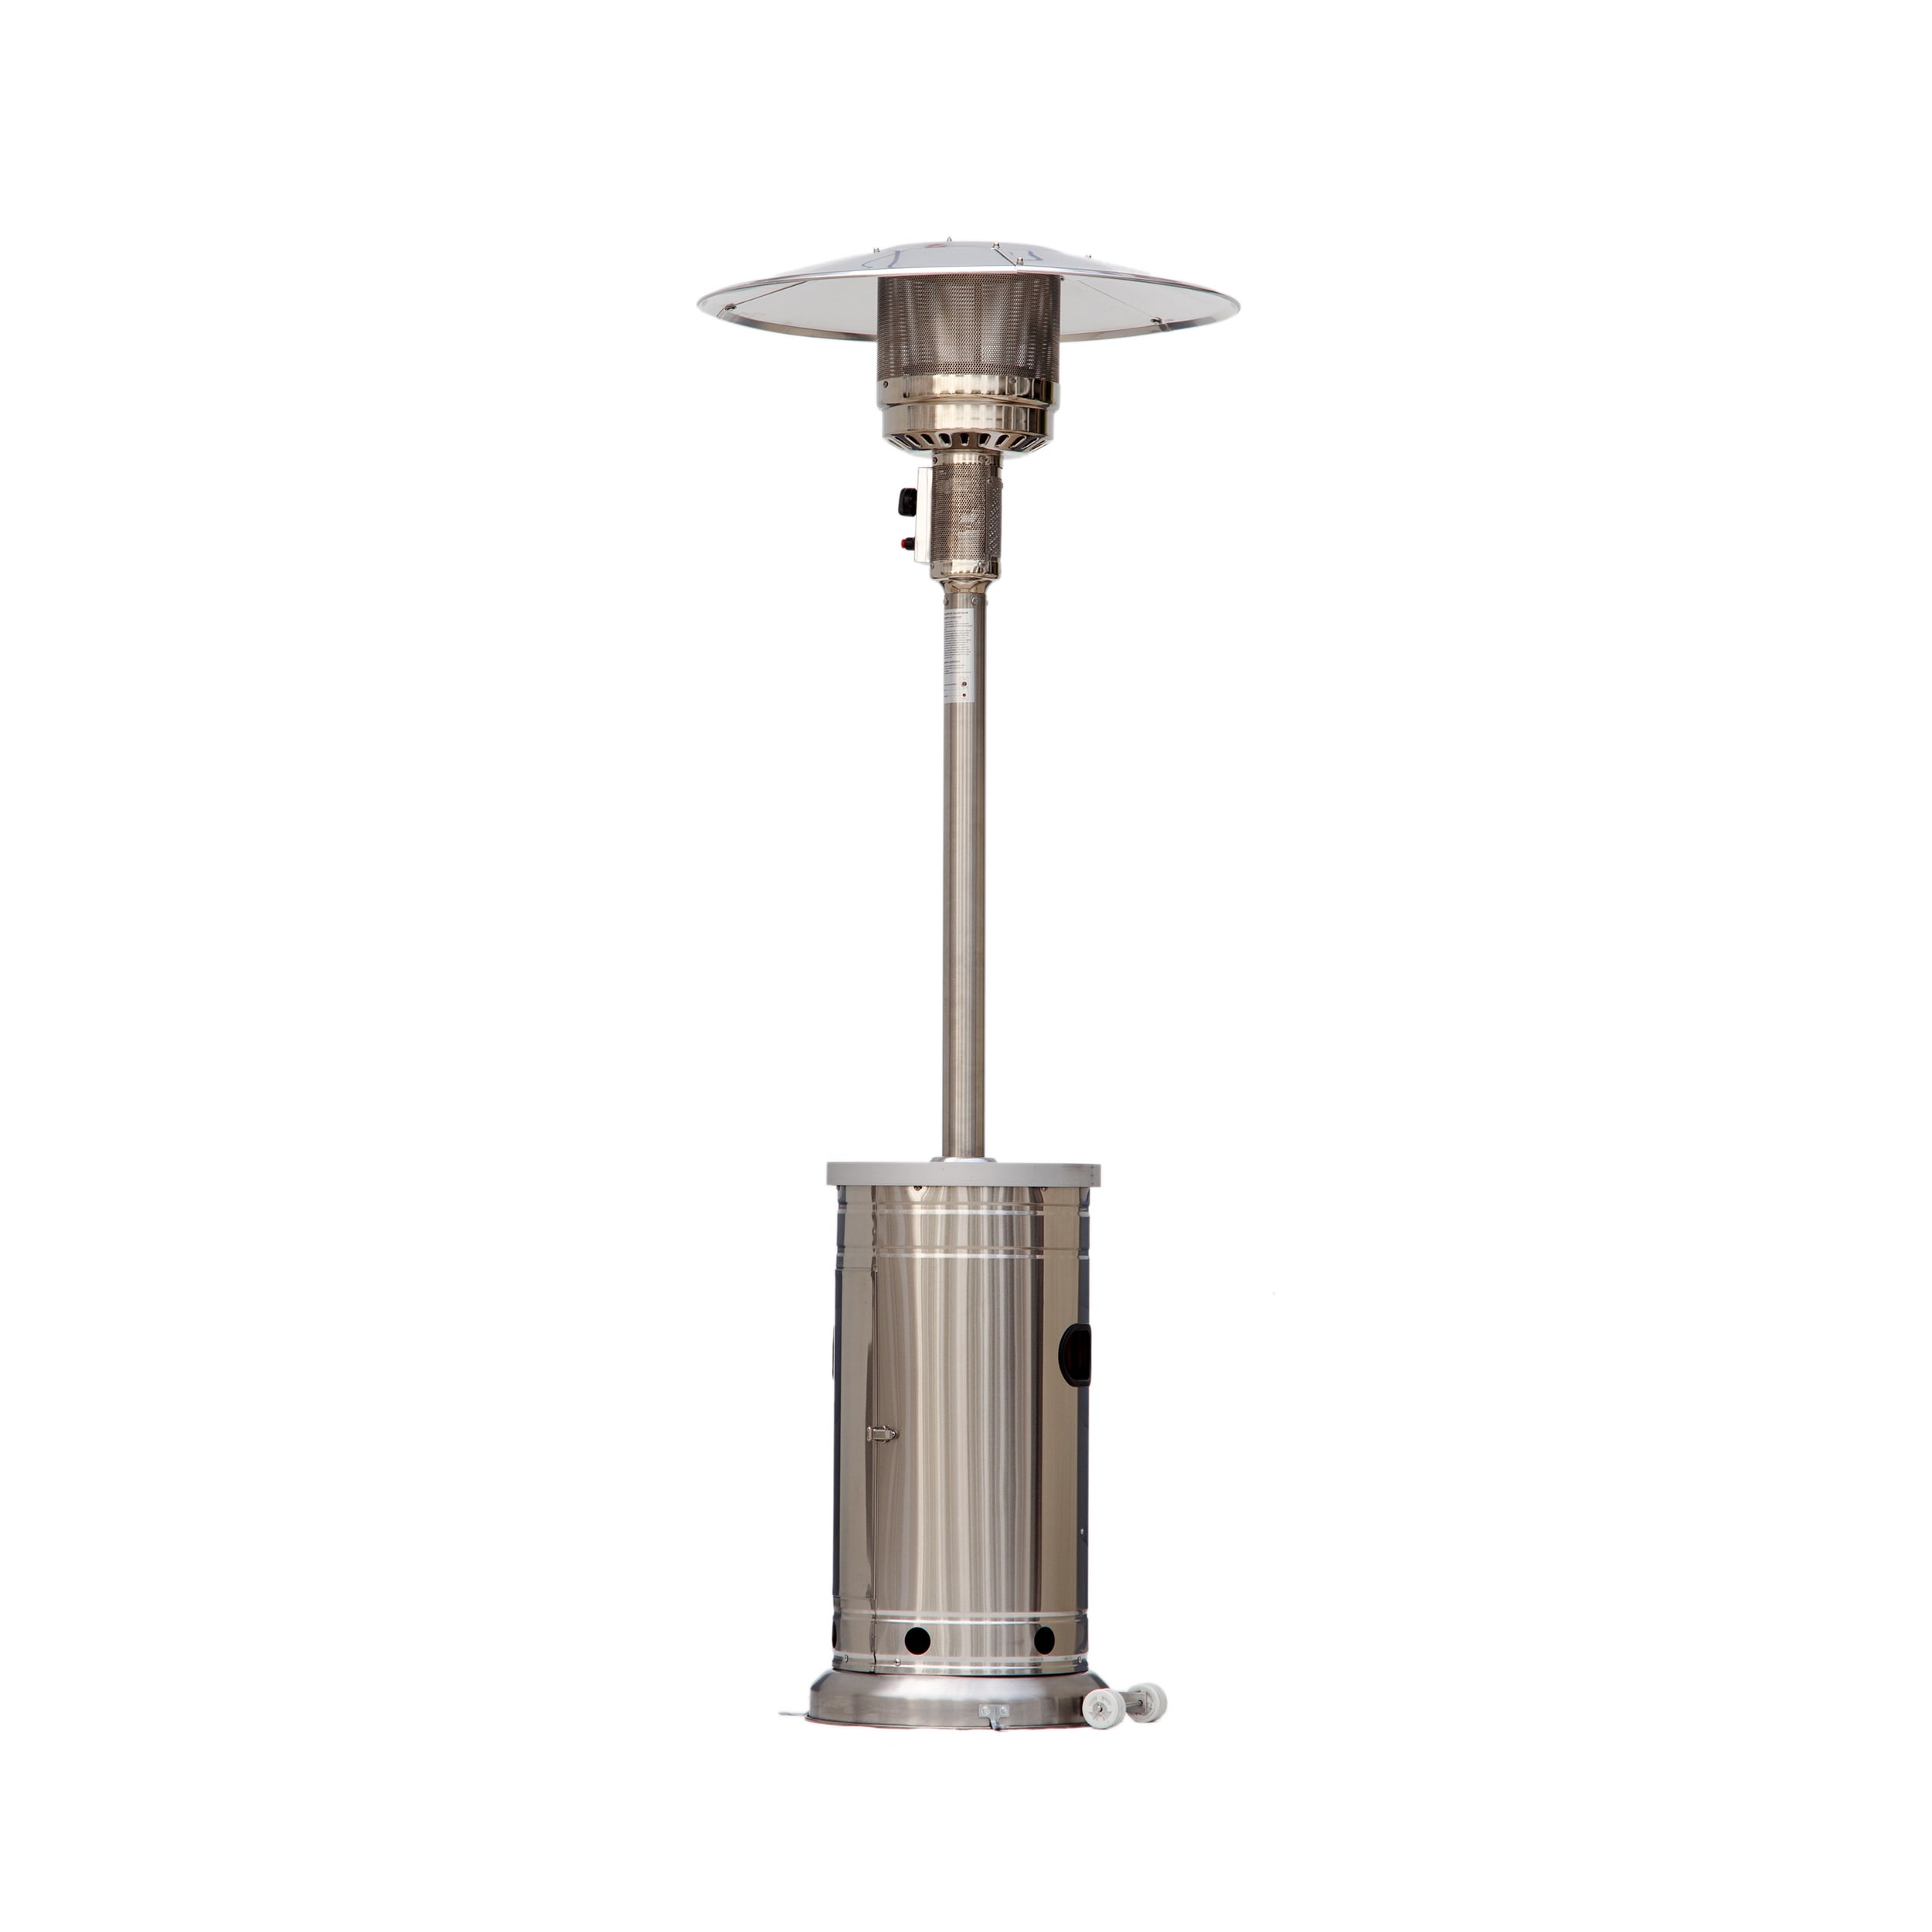 Stainless Steel Briza Tabletop Propane Patio Heater 